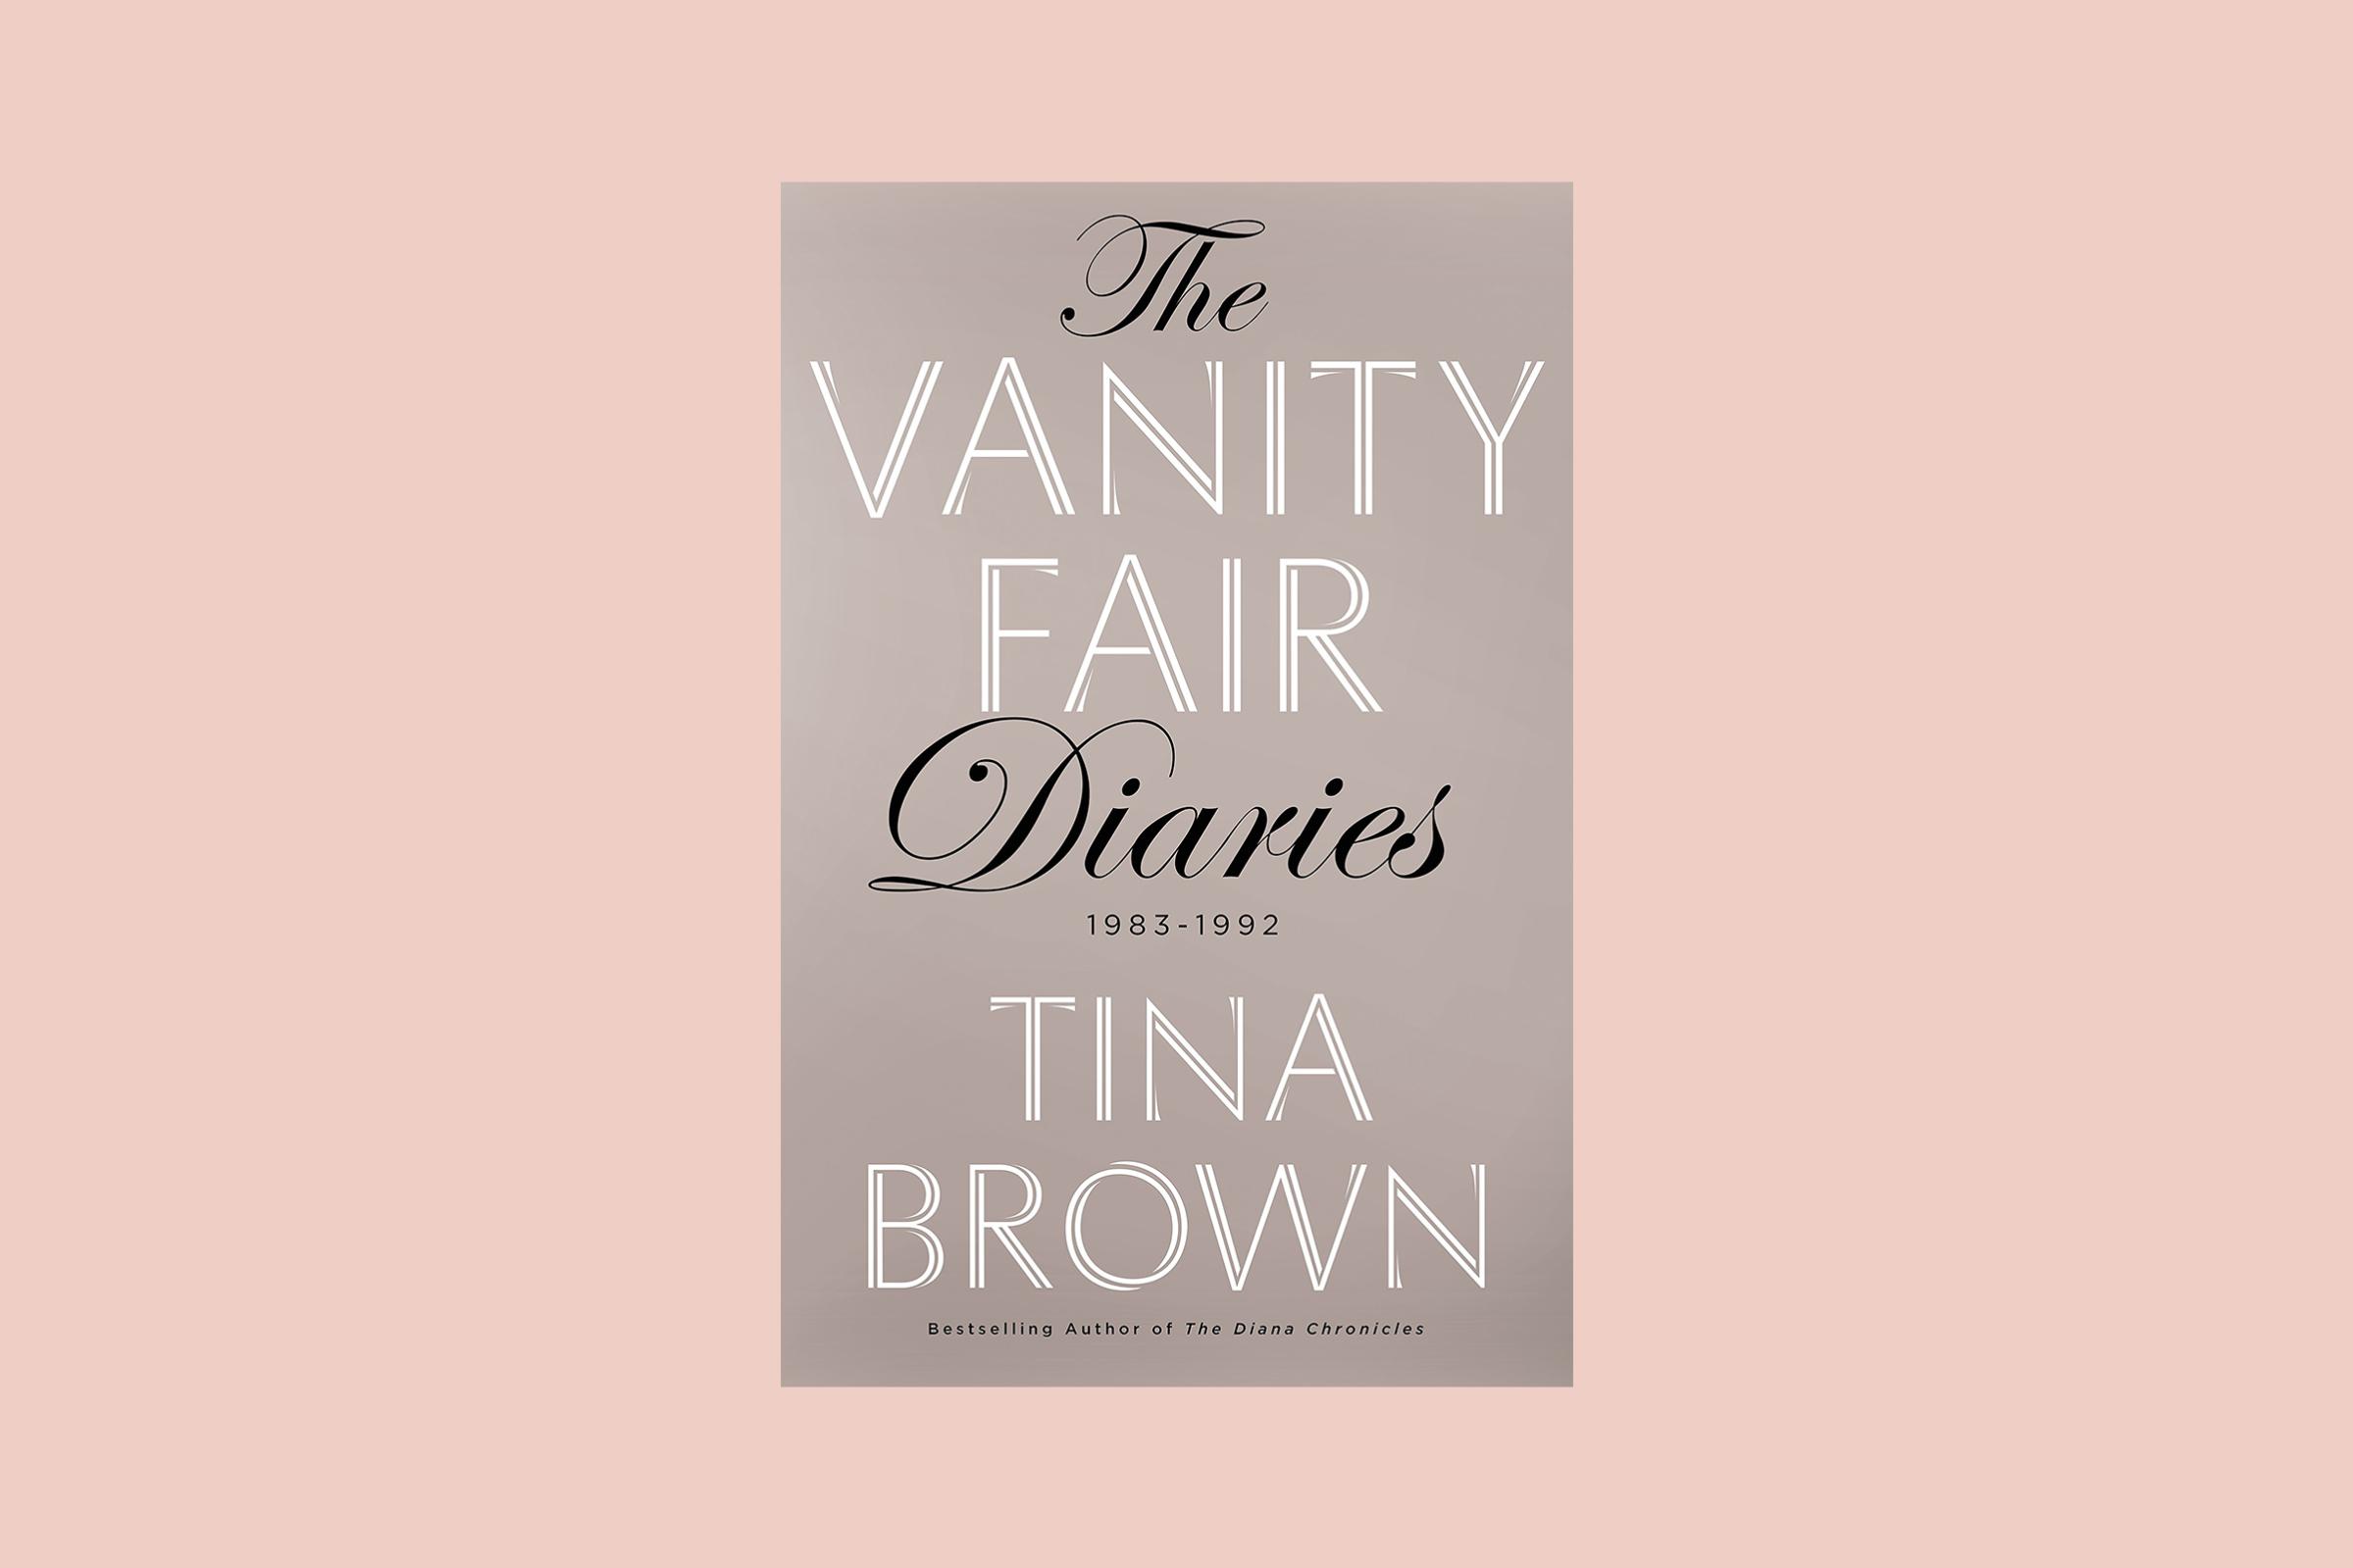 The Vanity Fair Diaries is one of the top 10 non-fiction books of 2017